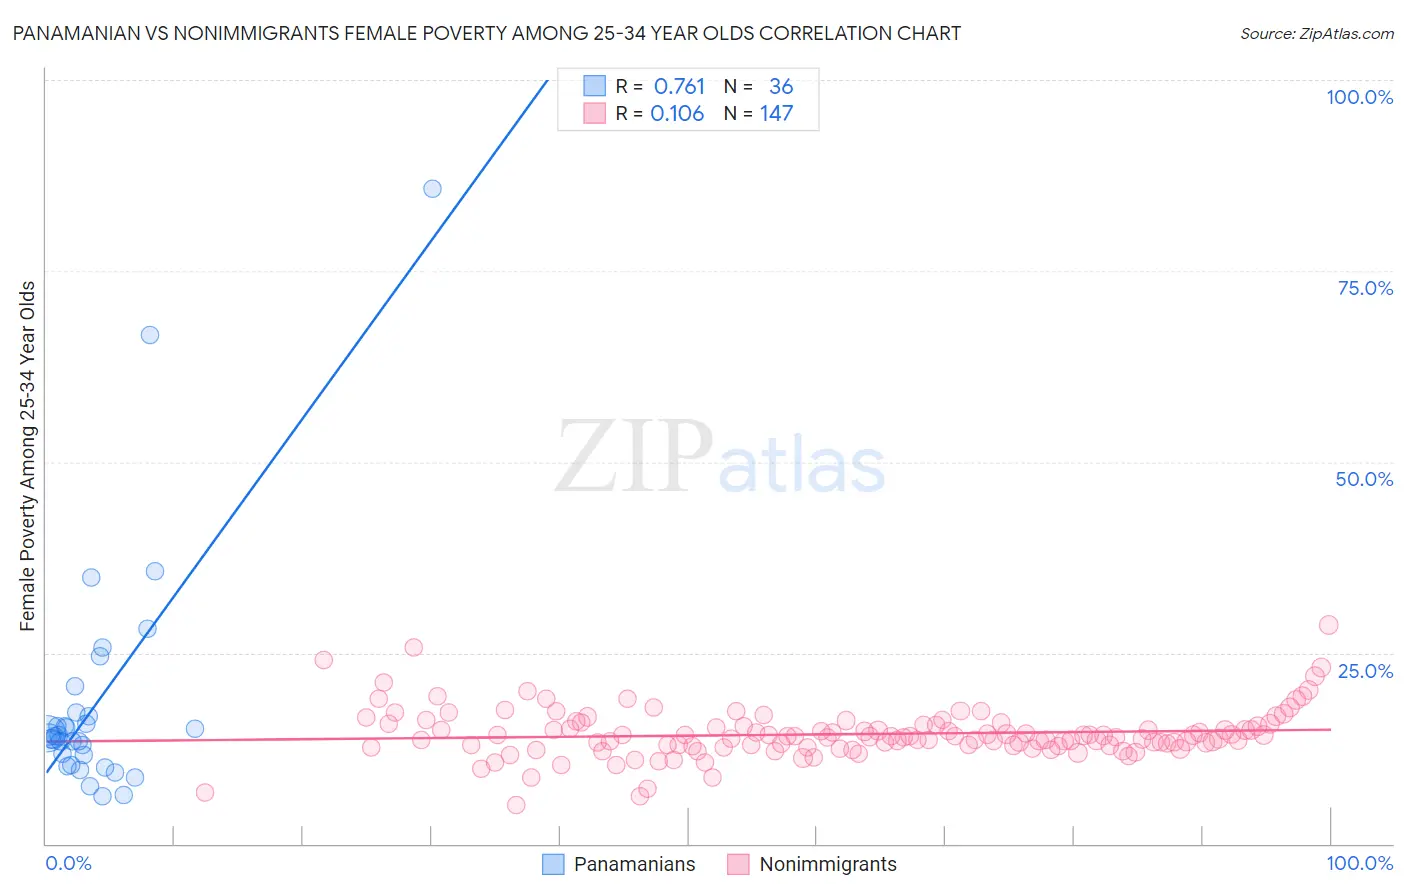 Panamanian vs Nonimmigrants Female Poverty Among 25-34 Year Olds